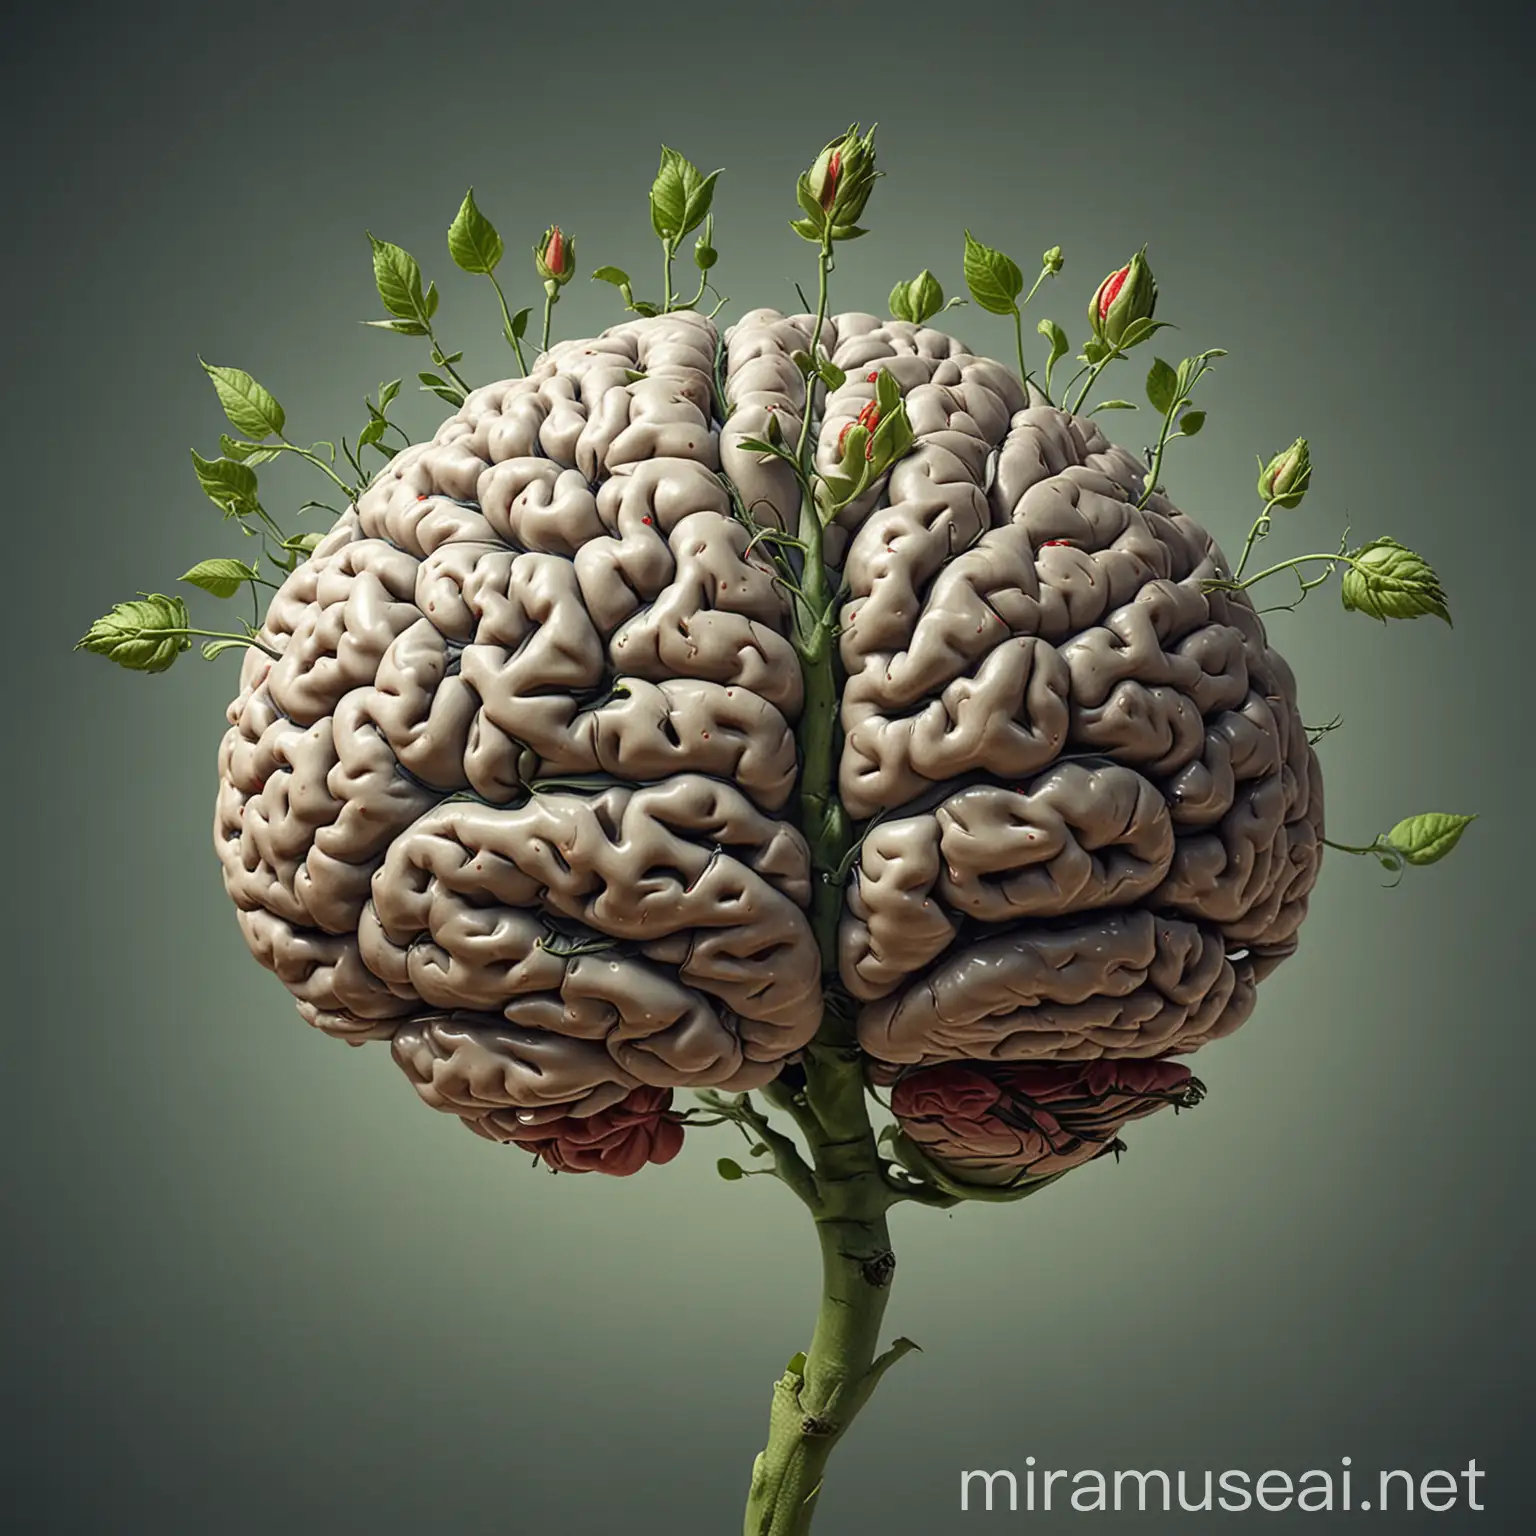 A brain from which a bud grows